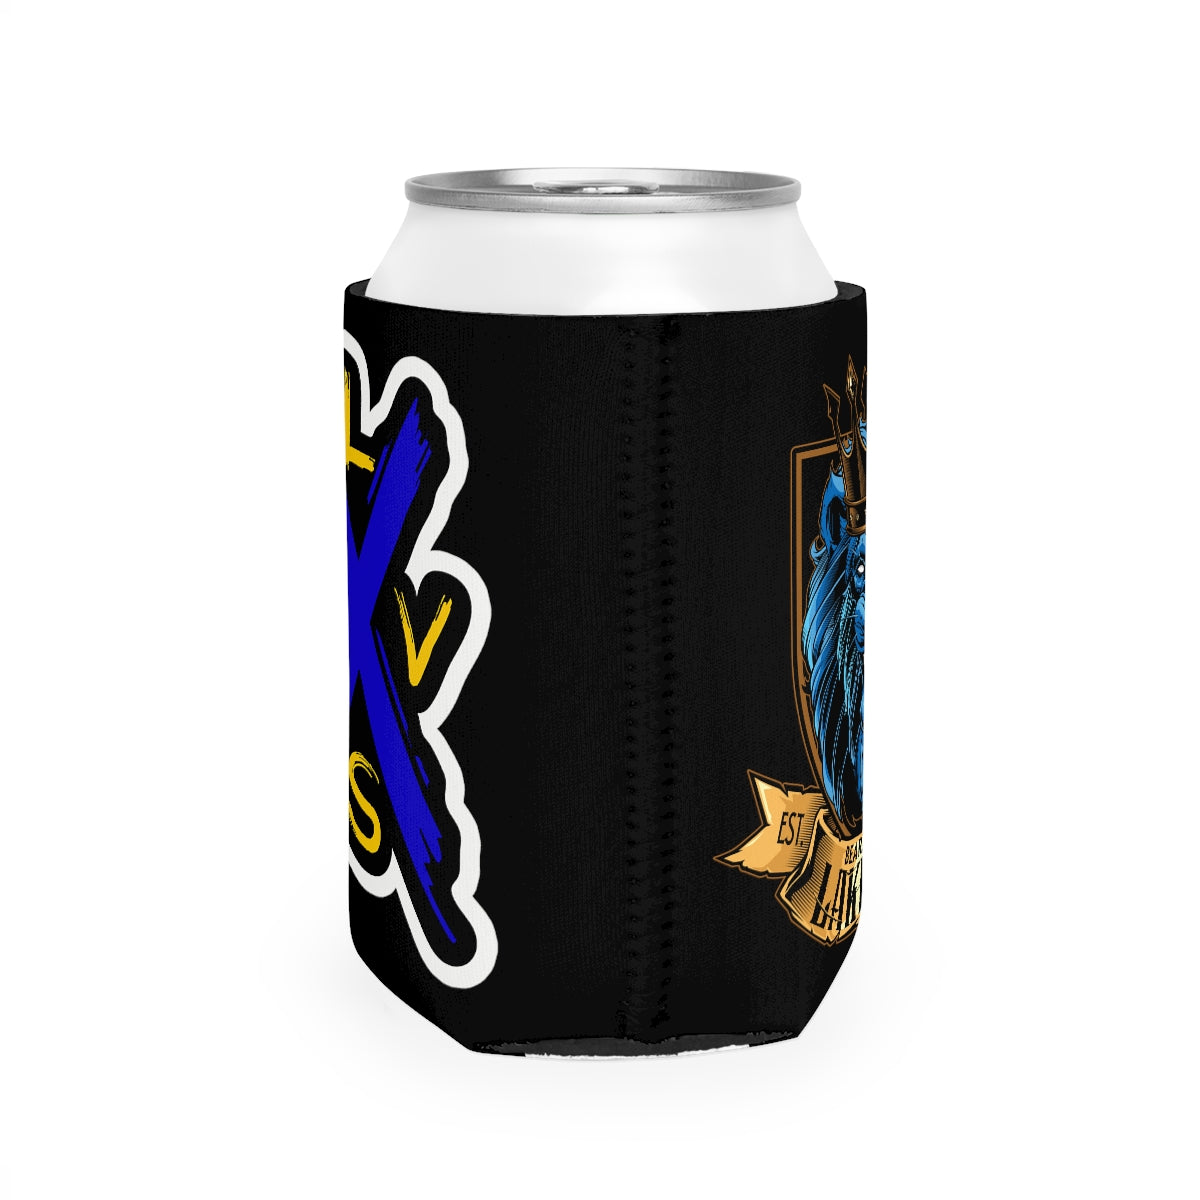 BVLS Can Cooler Sleeve